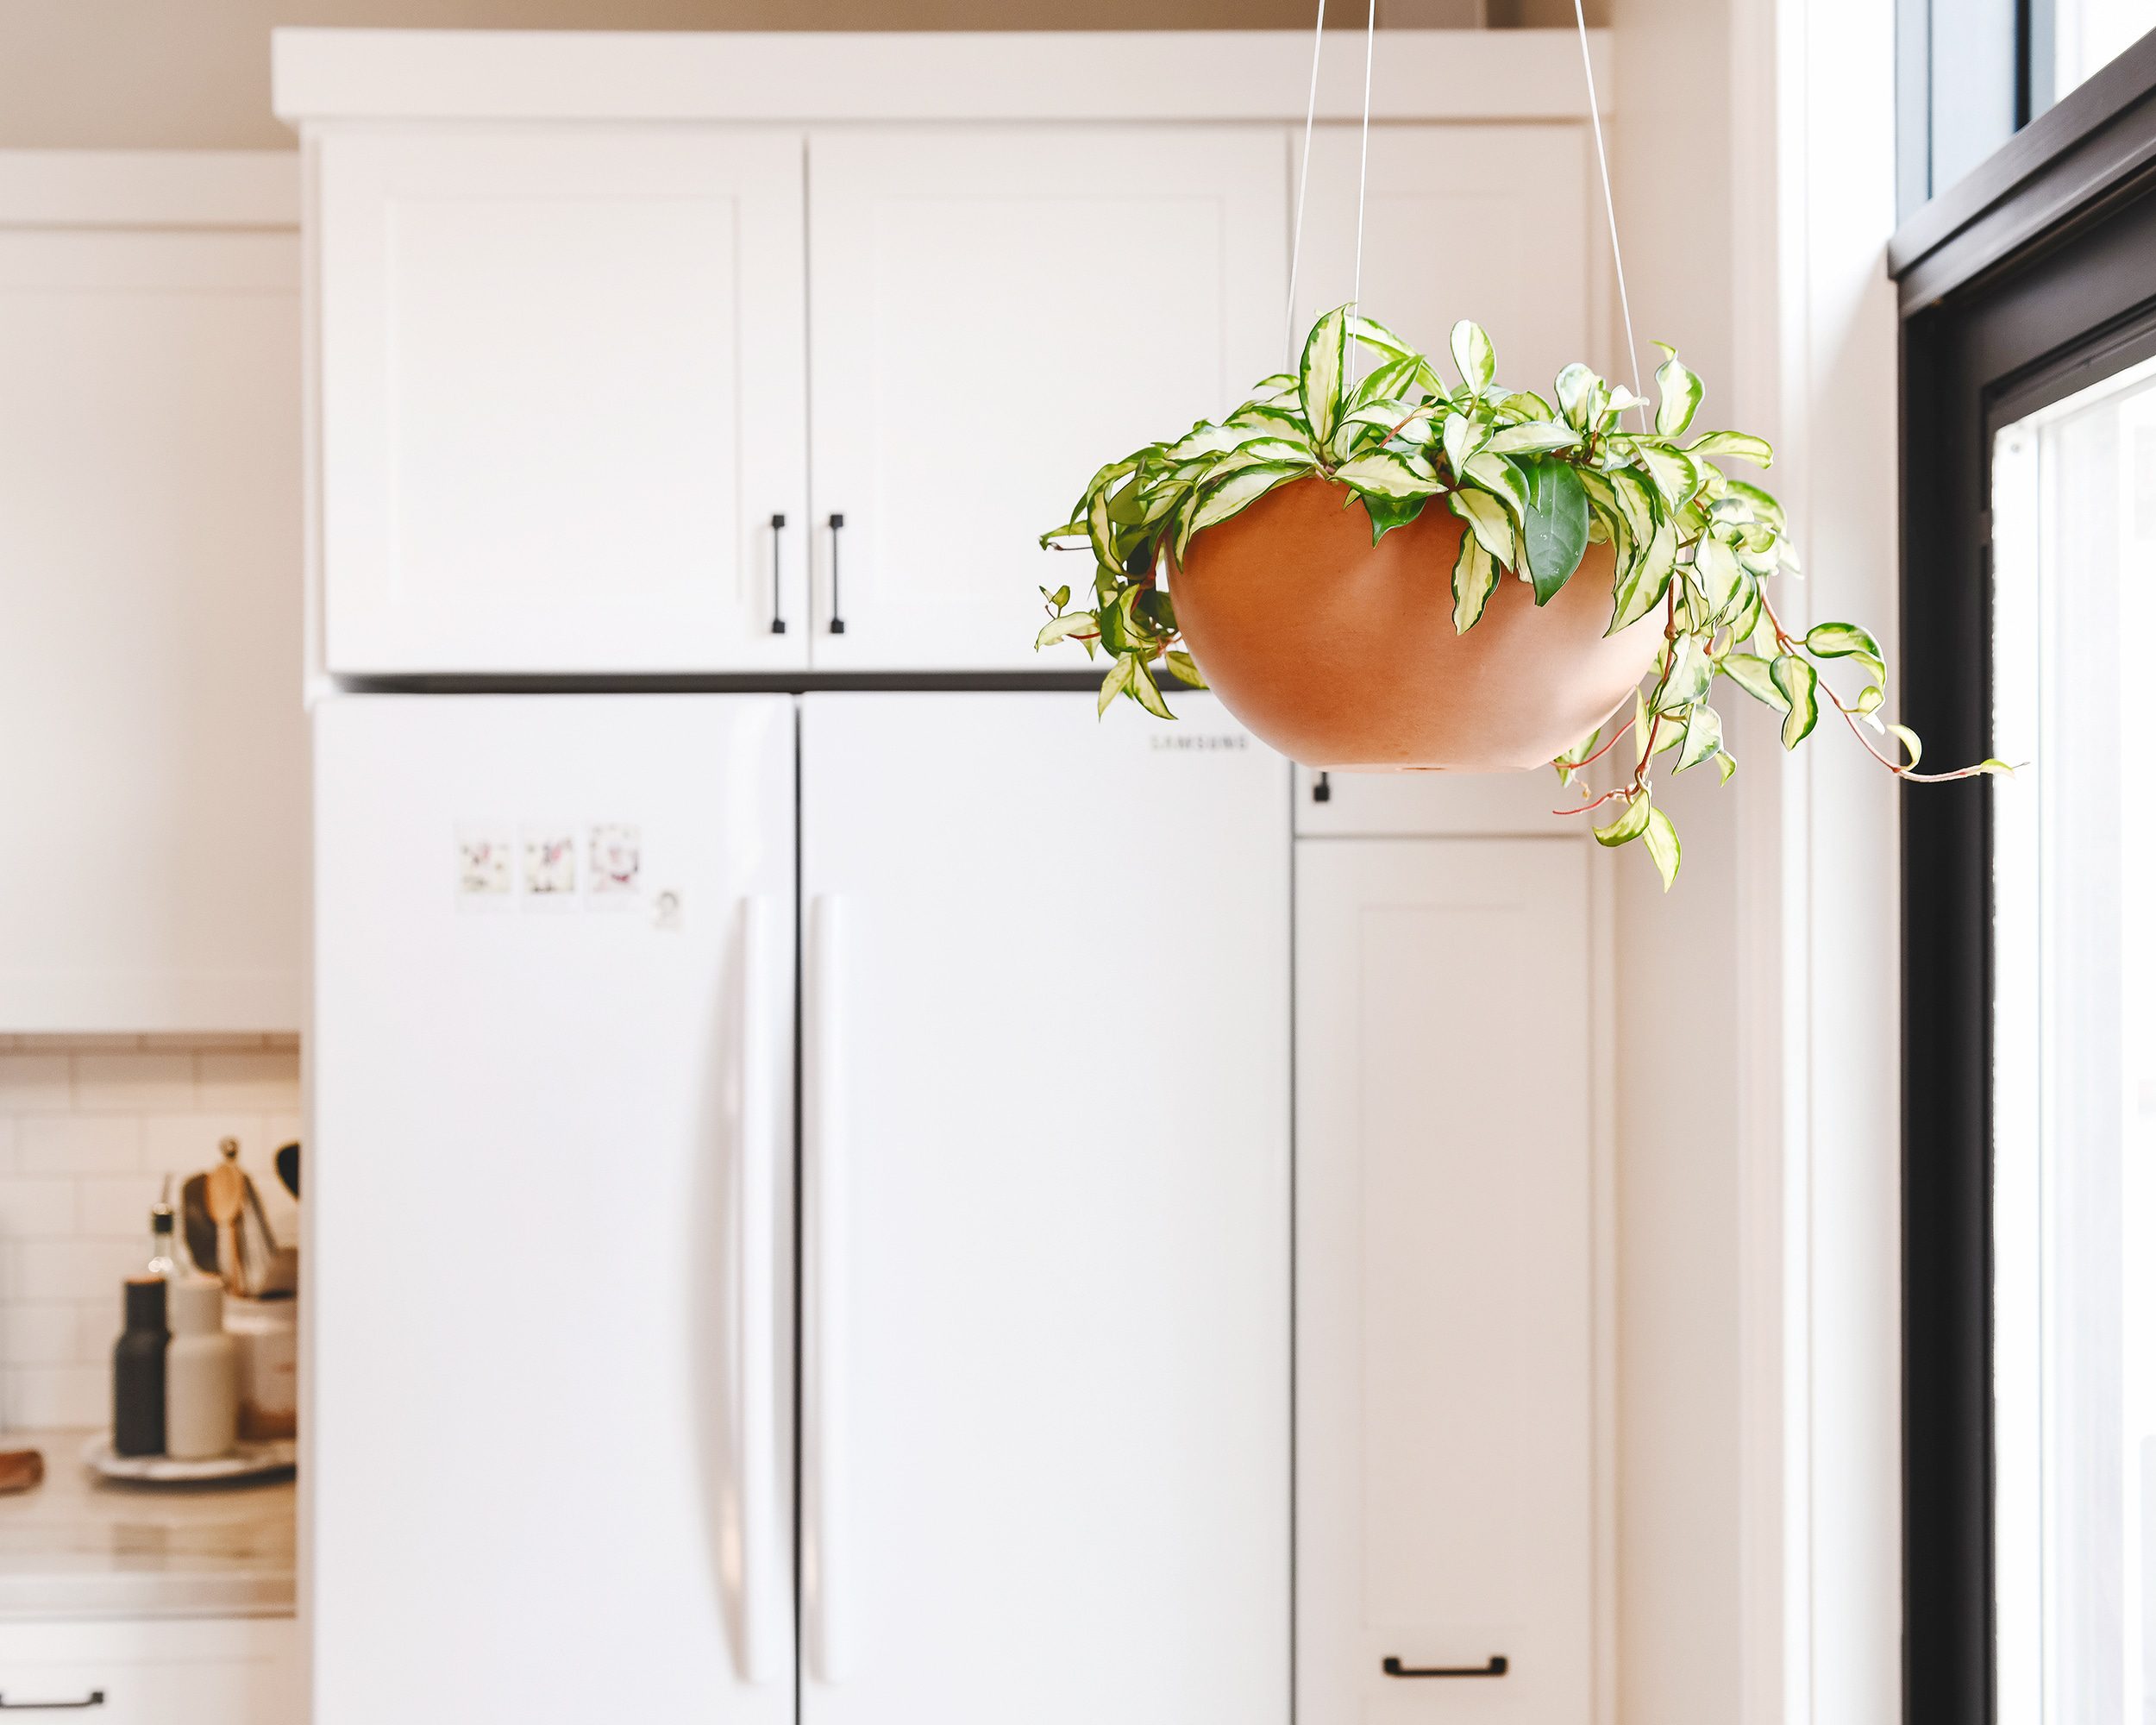 A hanging terracotta planter in our kitchen with a Hoya | How We Care for Houseplants via Yellow Brick Home #houseplants